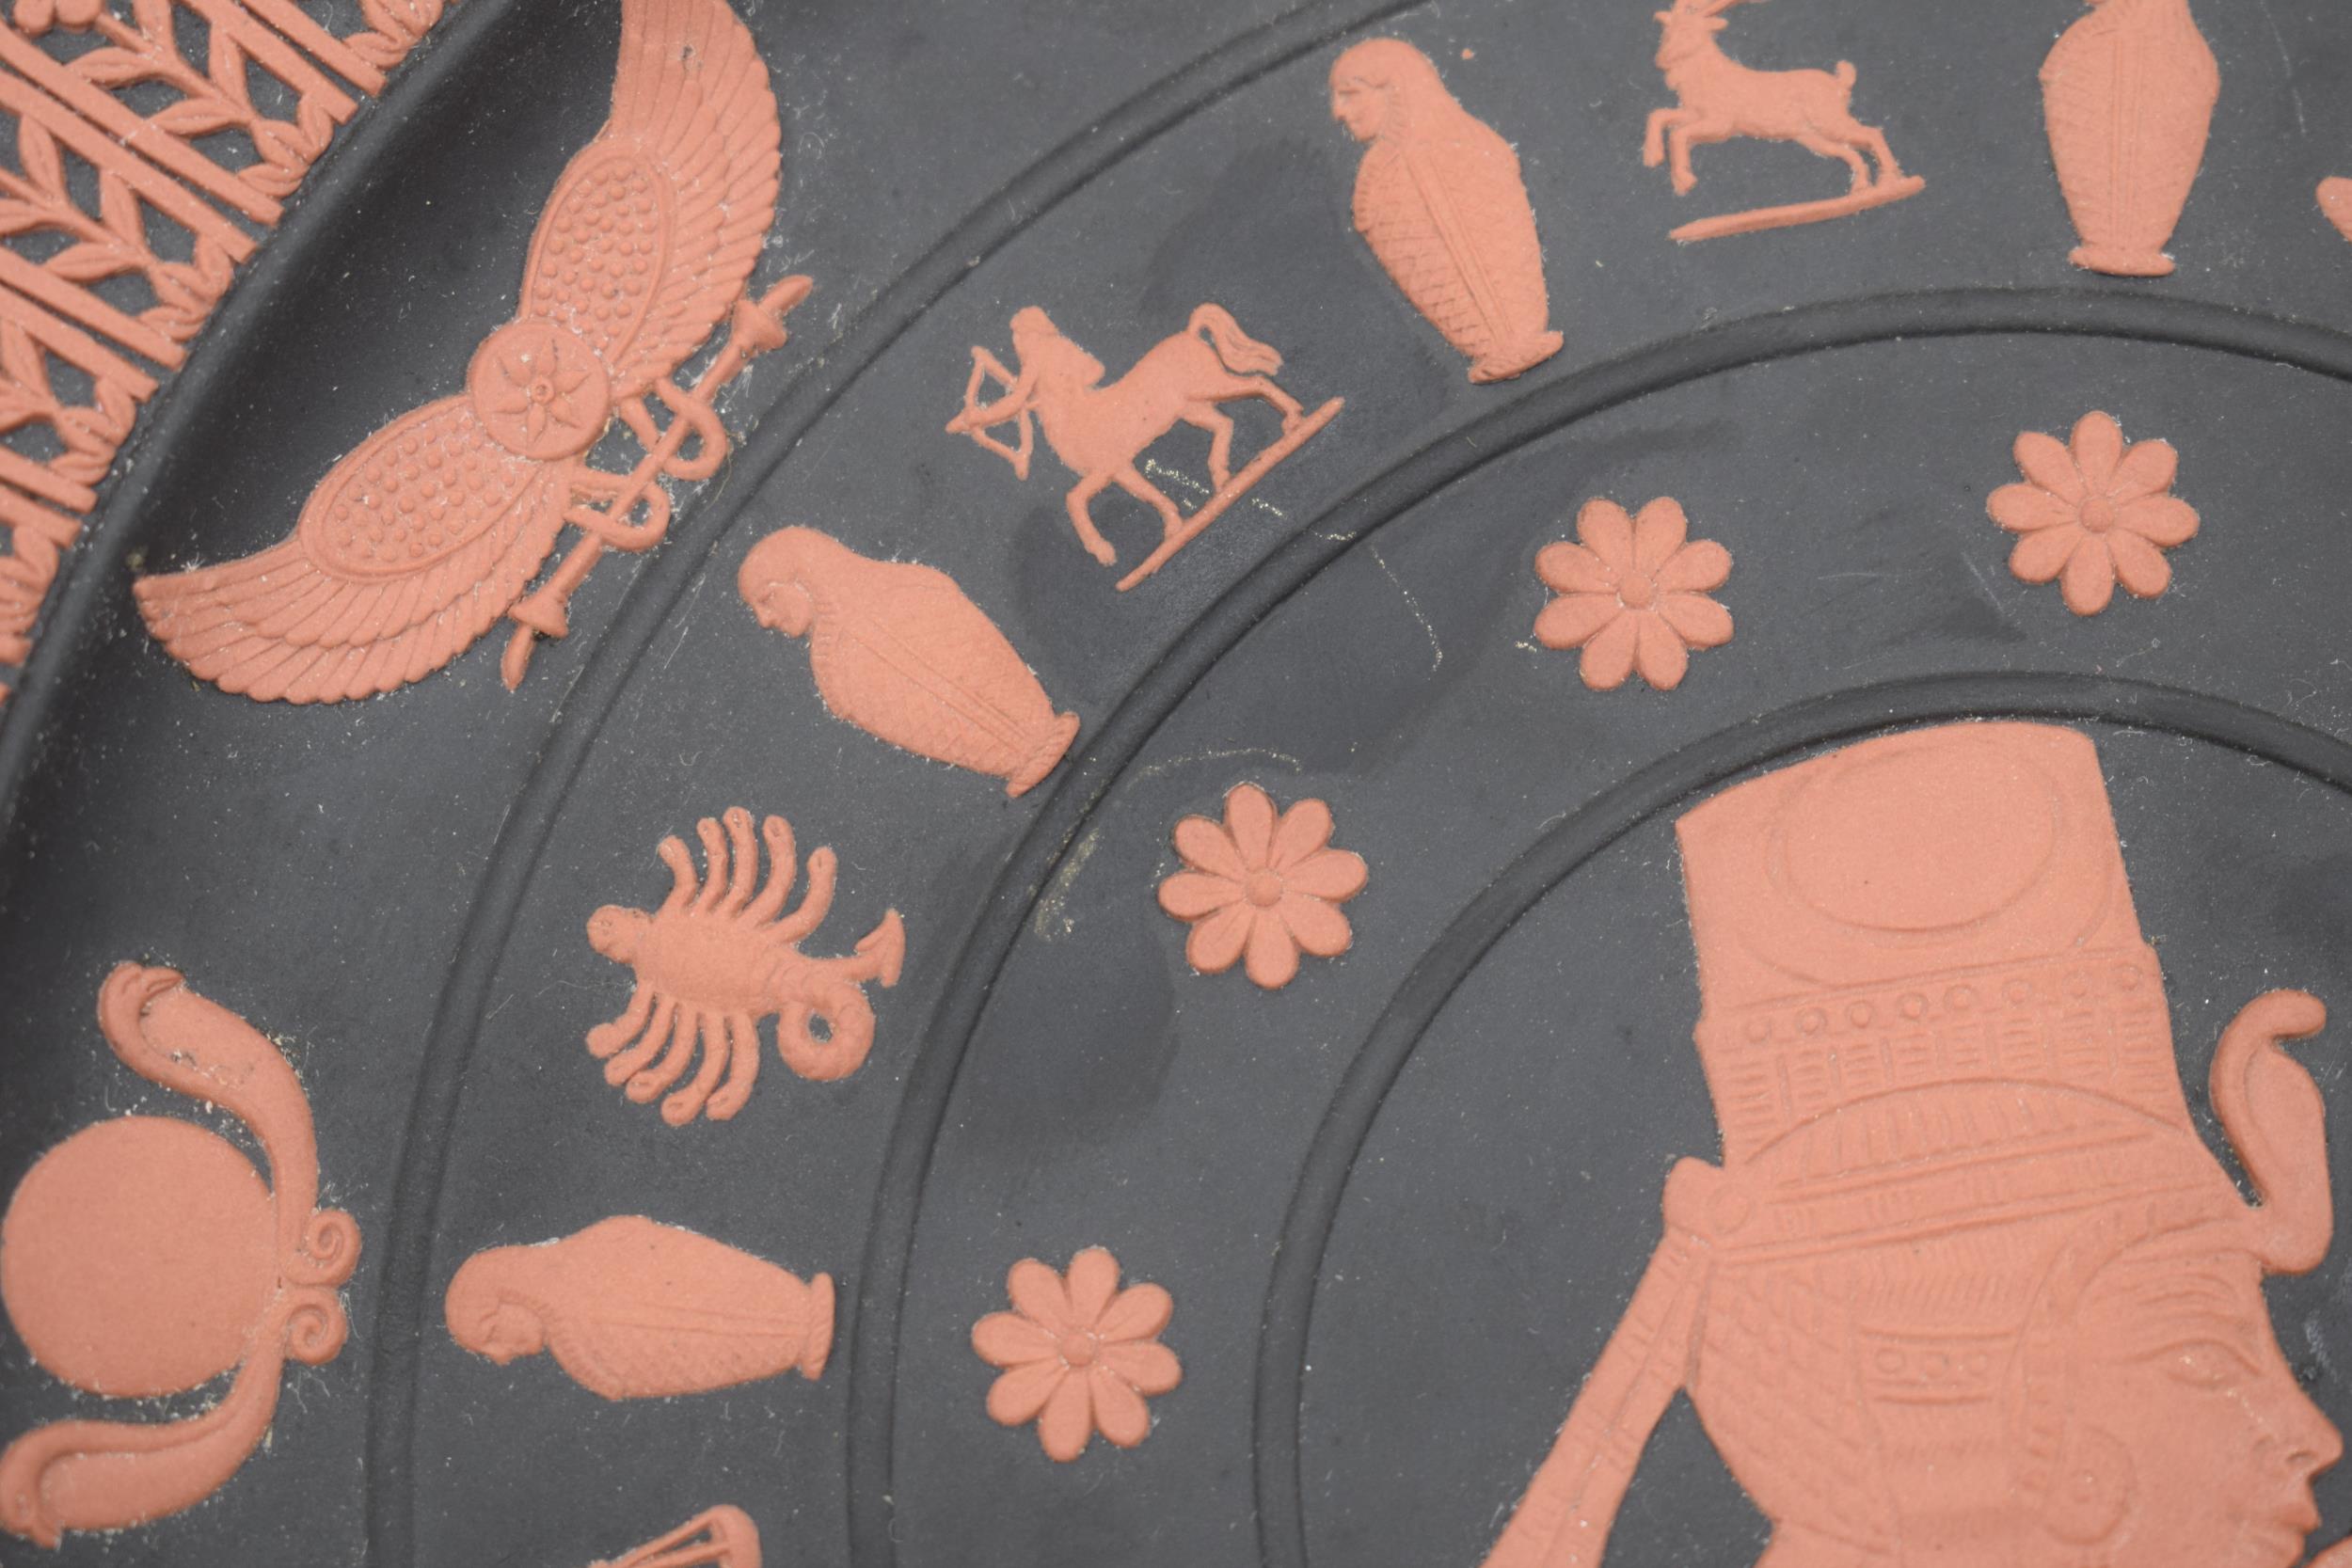 Wedgwood black and terracotta Jasperware limited edition plate of Ankhesenamun Queen of - Image 3 of 5